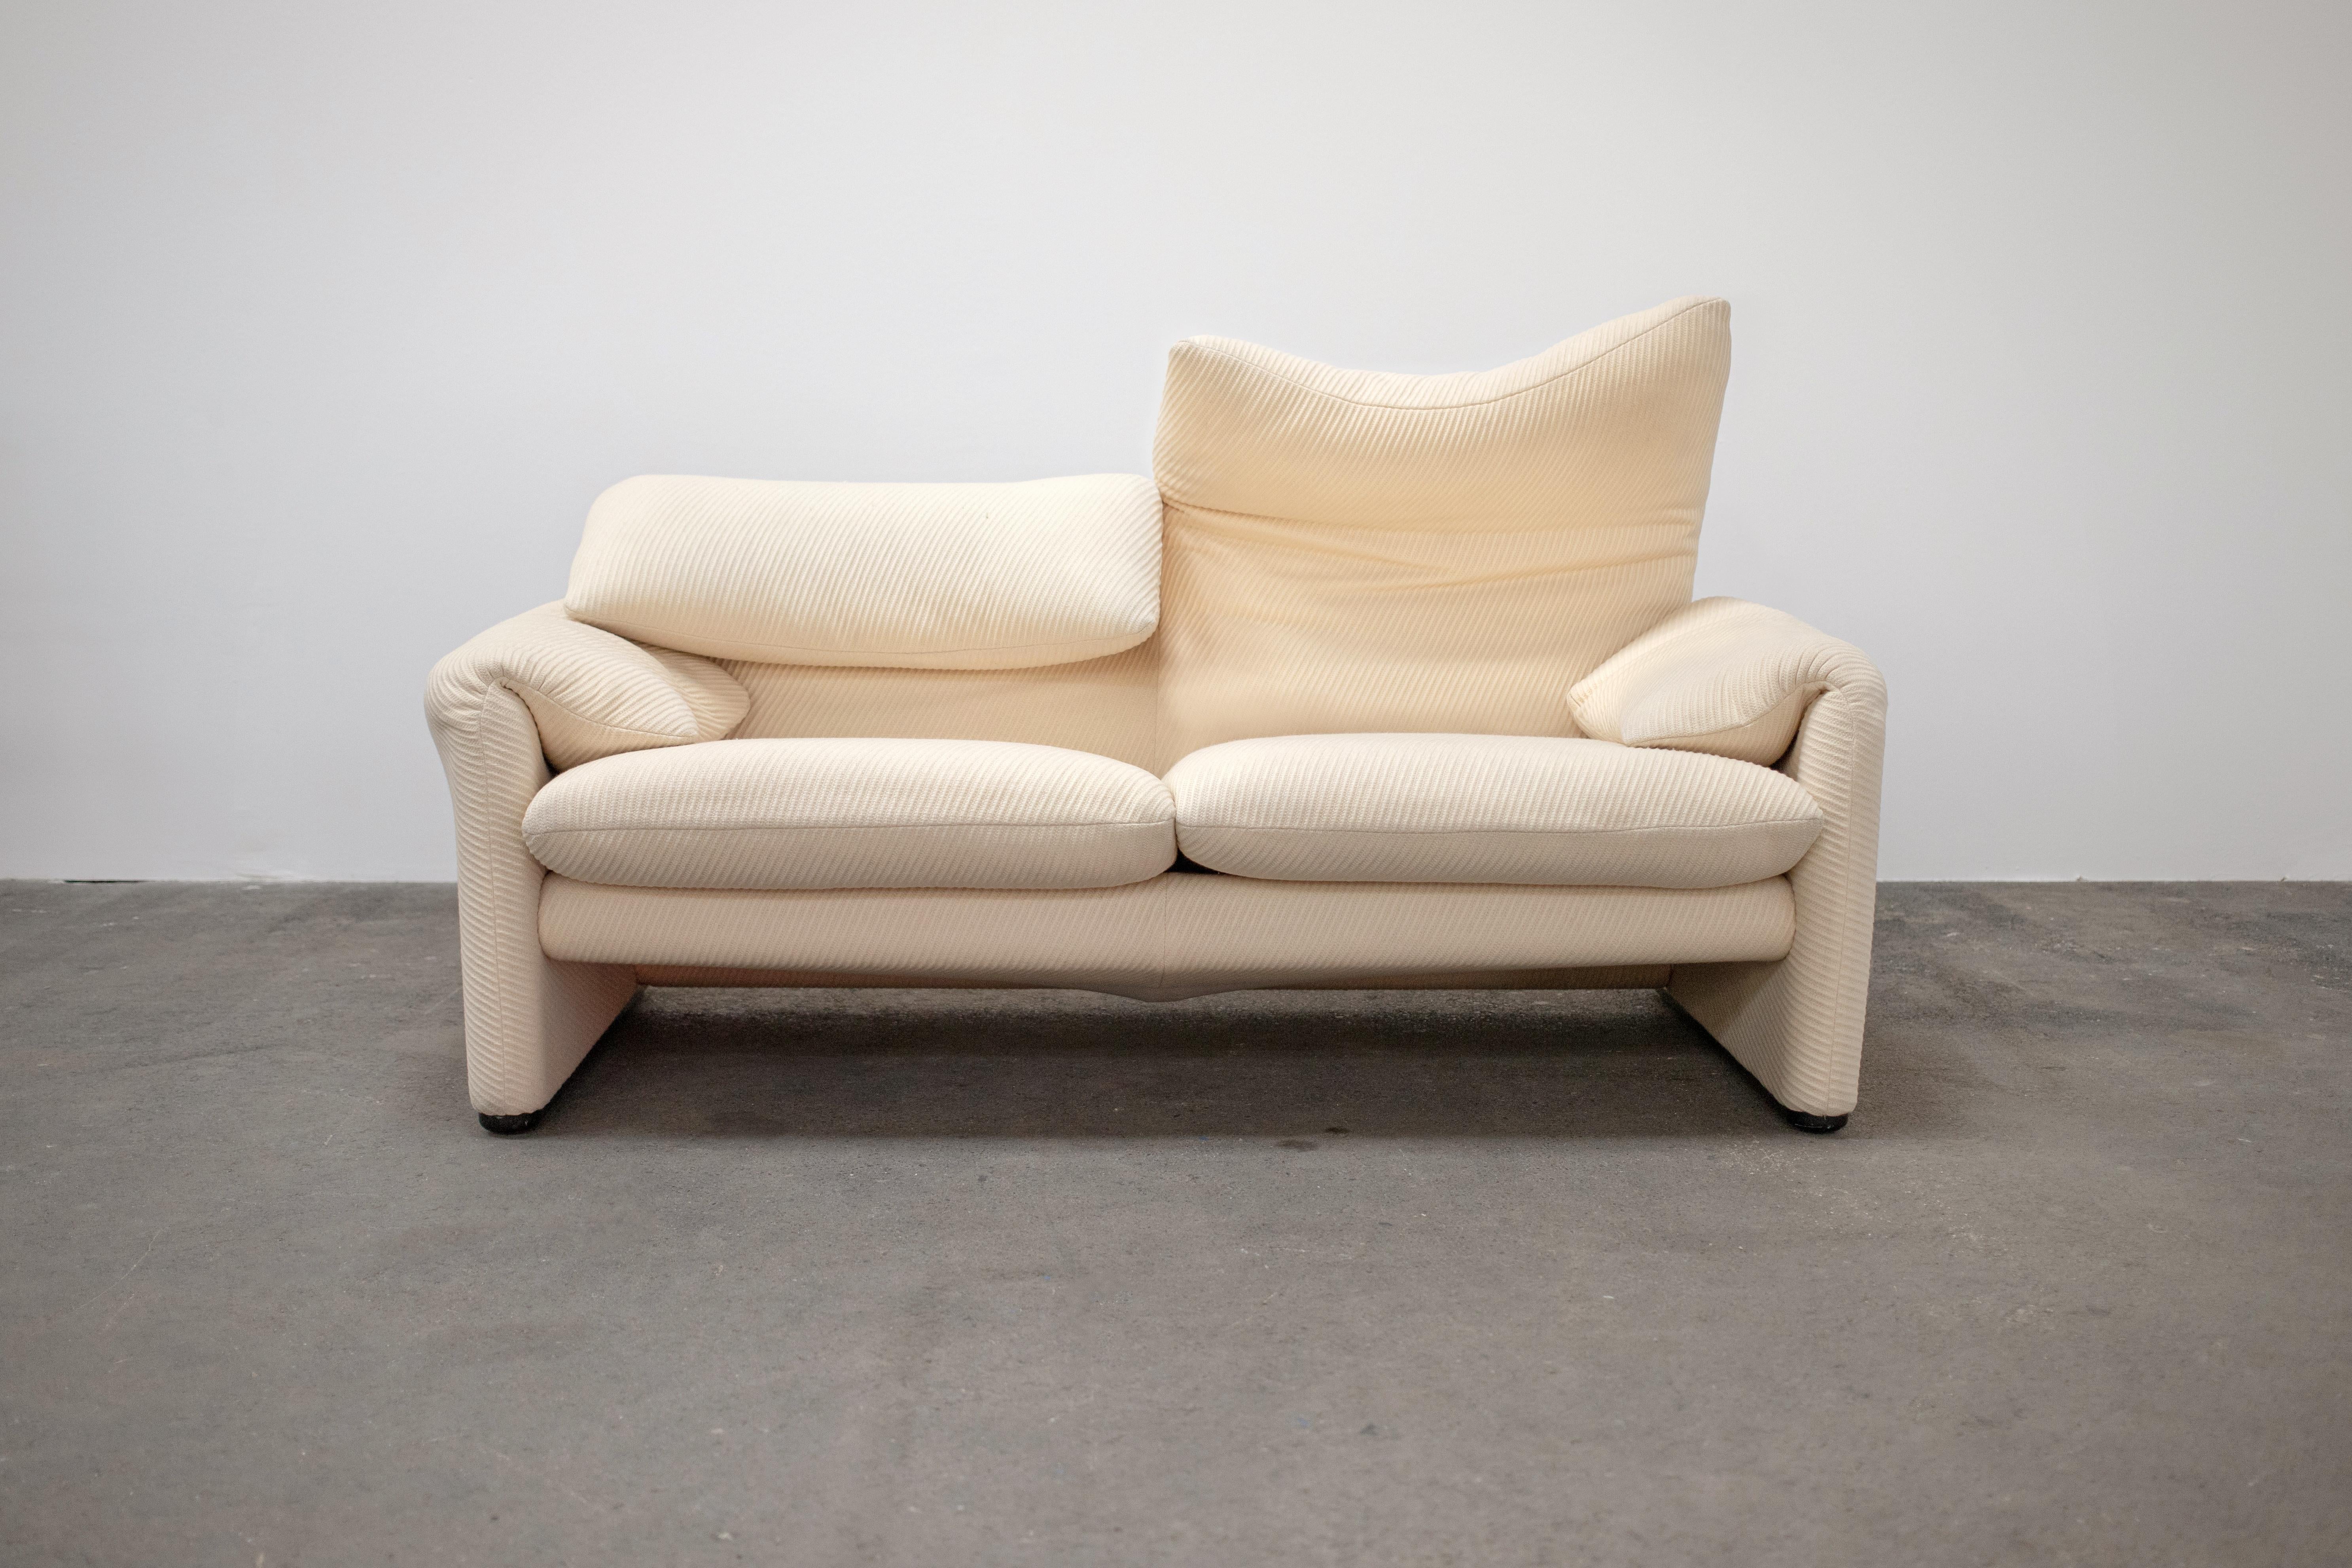 Wool 1970s 2-Seater Maralunga Sofas by Vico Magistretti for Cassina